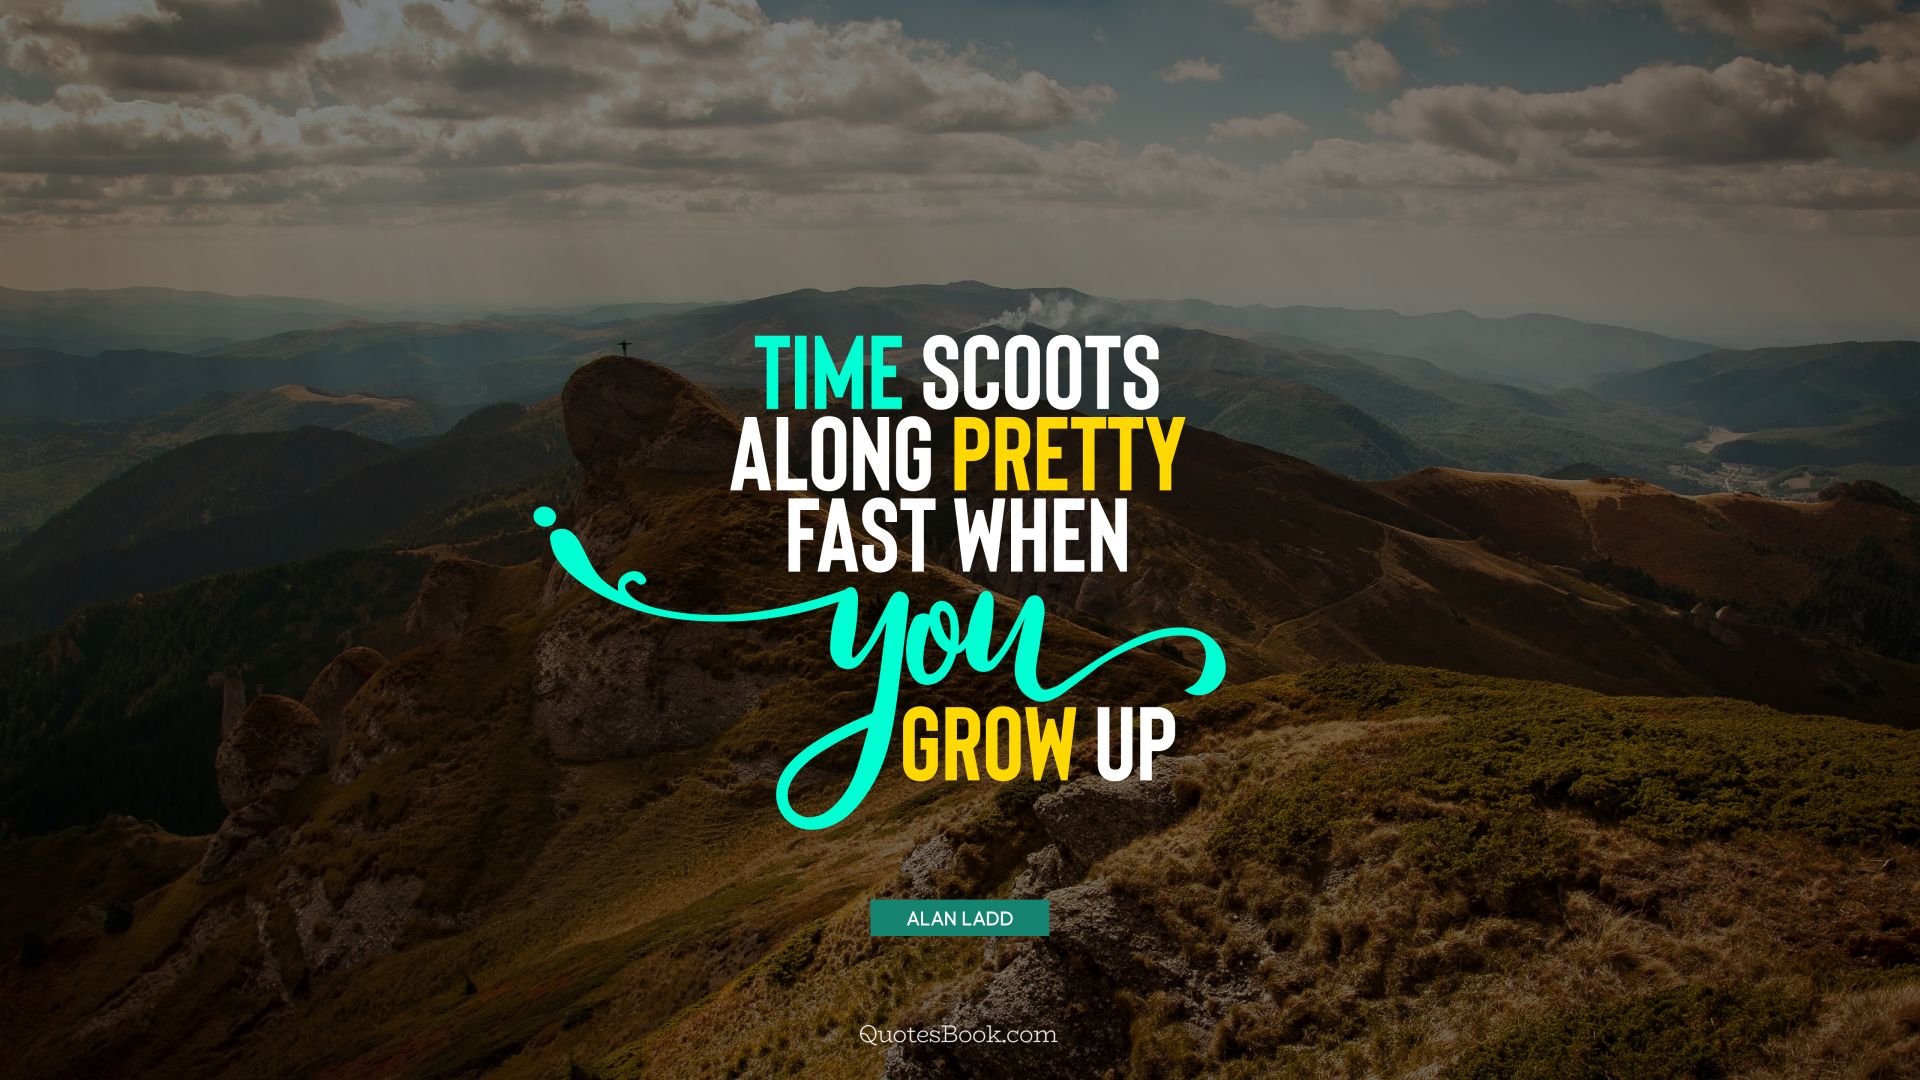 Time scoots along pretty fast when you grow up. - Quote by Alan Ladd